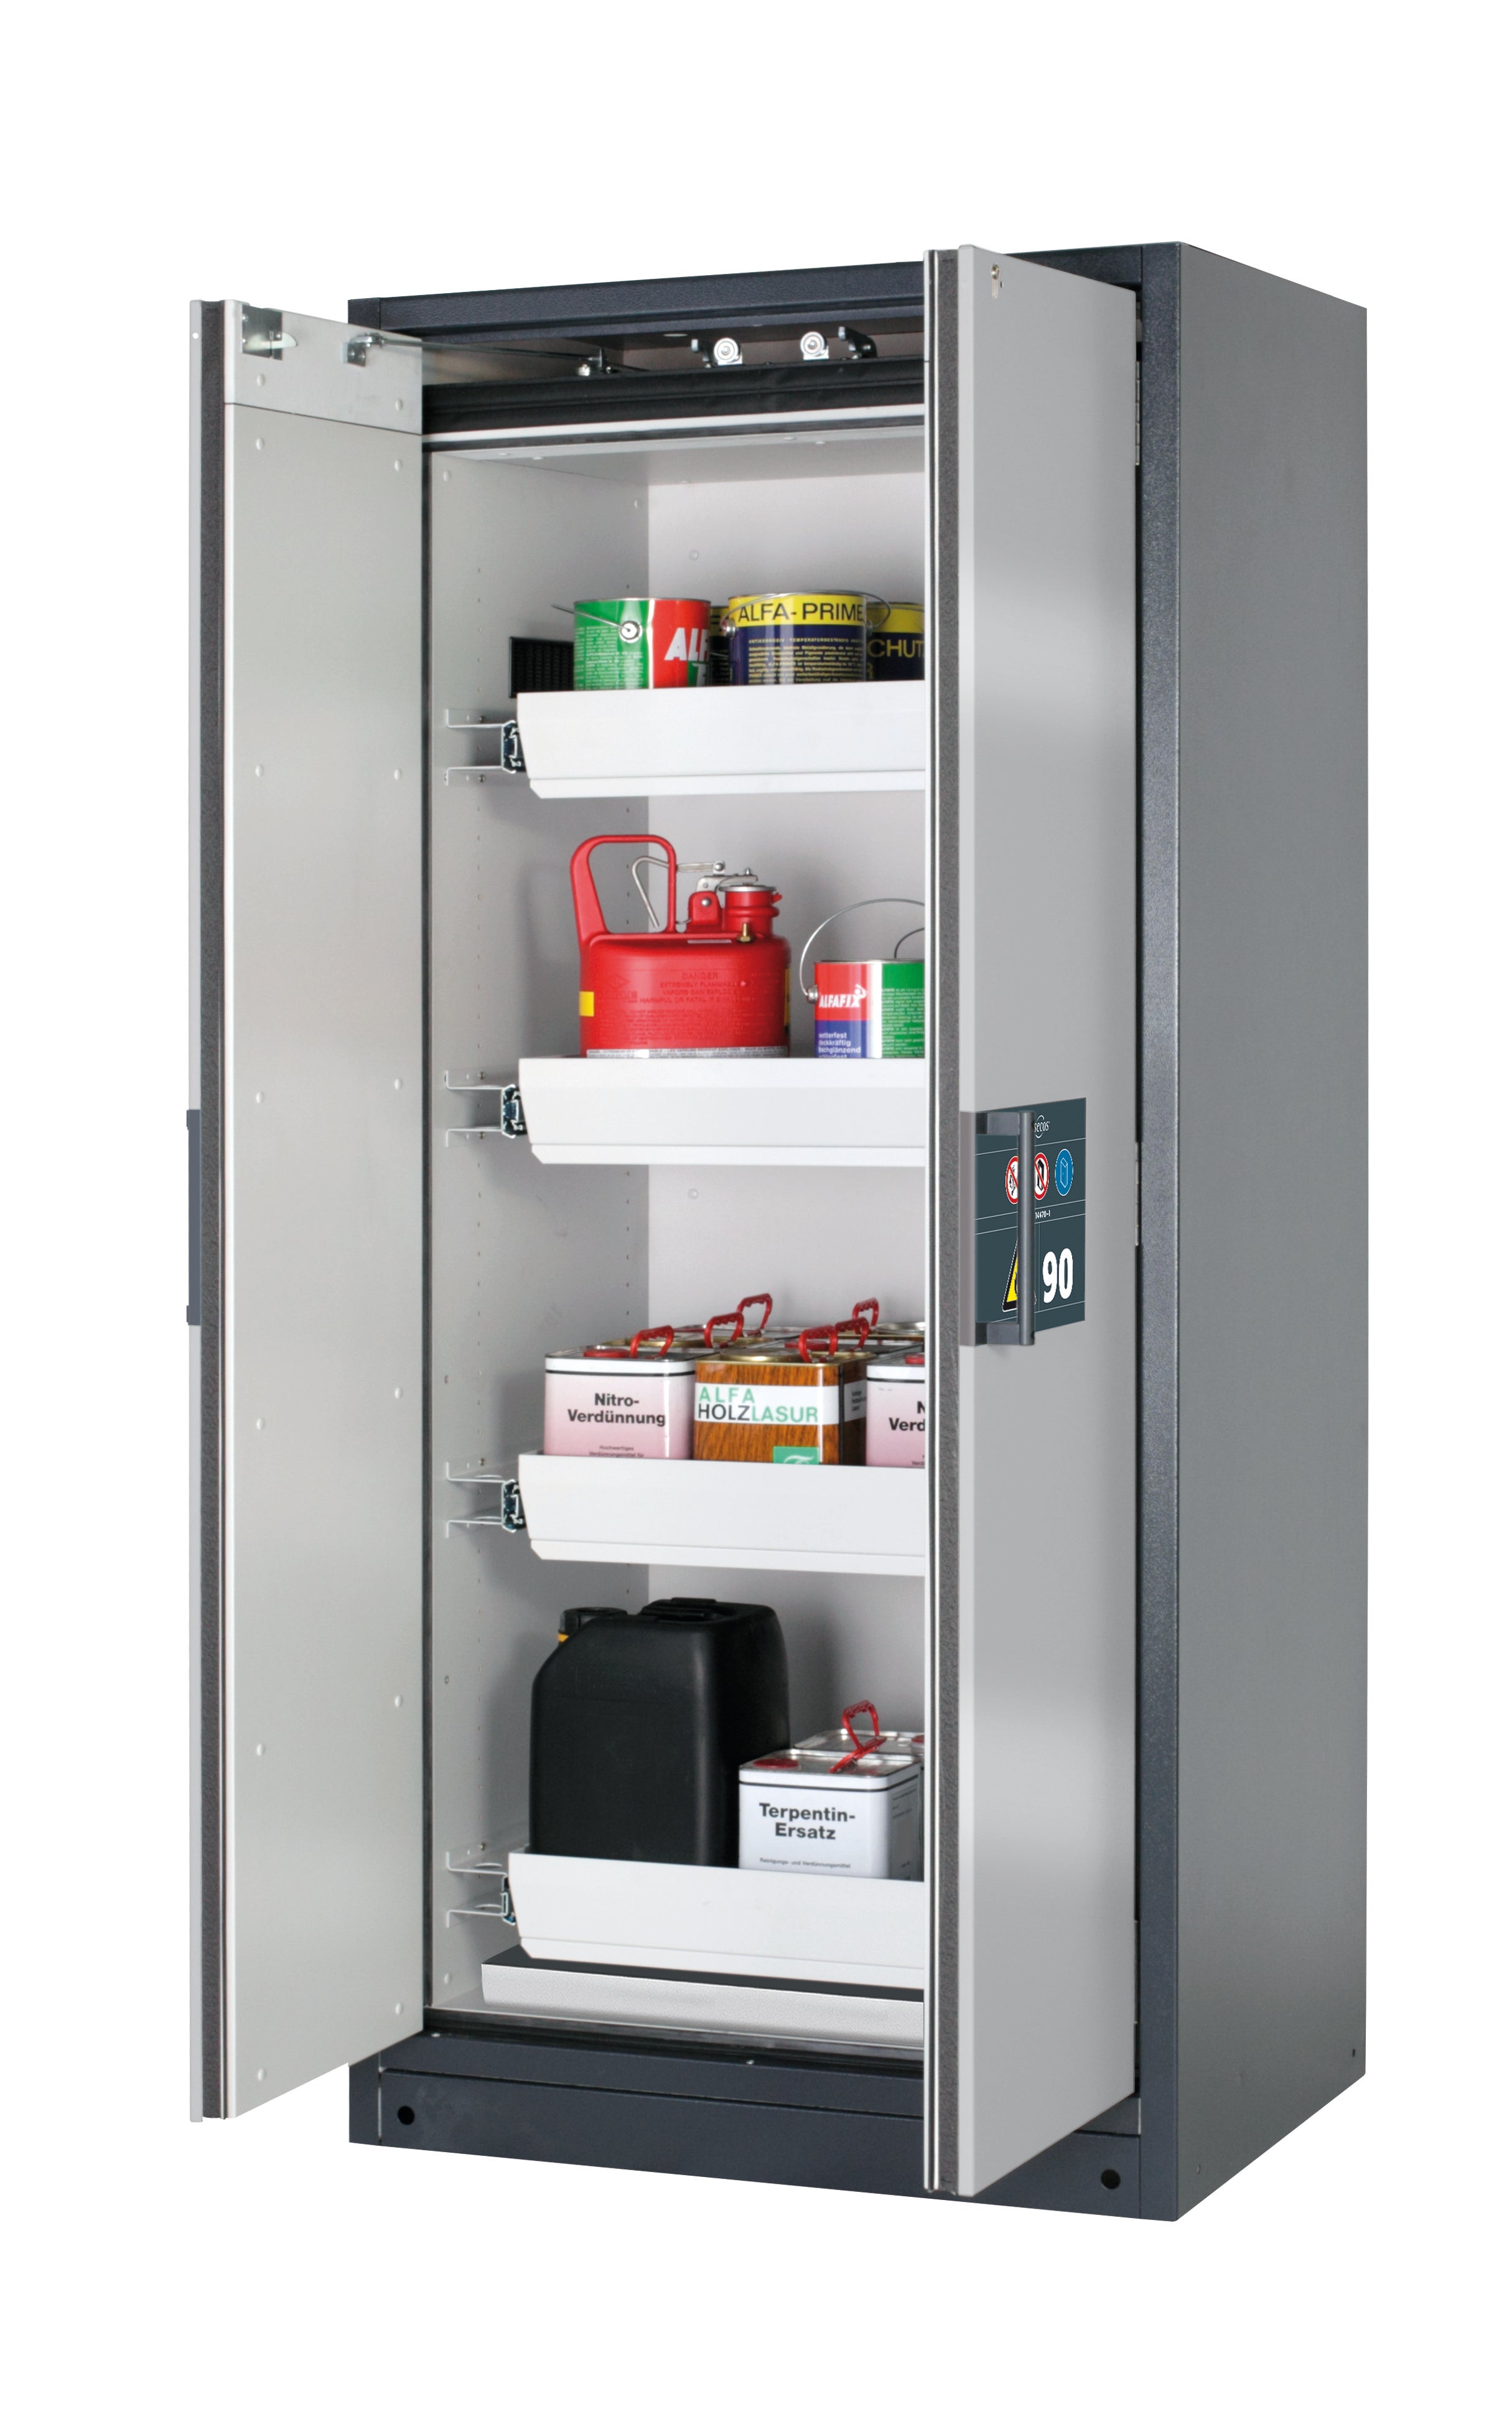 Type 90 safety storage cabinet Q-PEGASUS-90 model Q90.195.090.WDAC in asecos silver with 4x drawer (standard) (sheet steel),